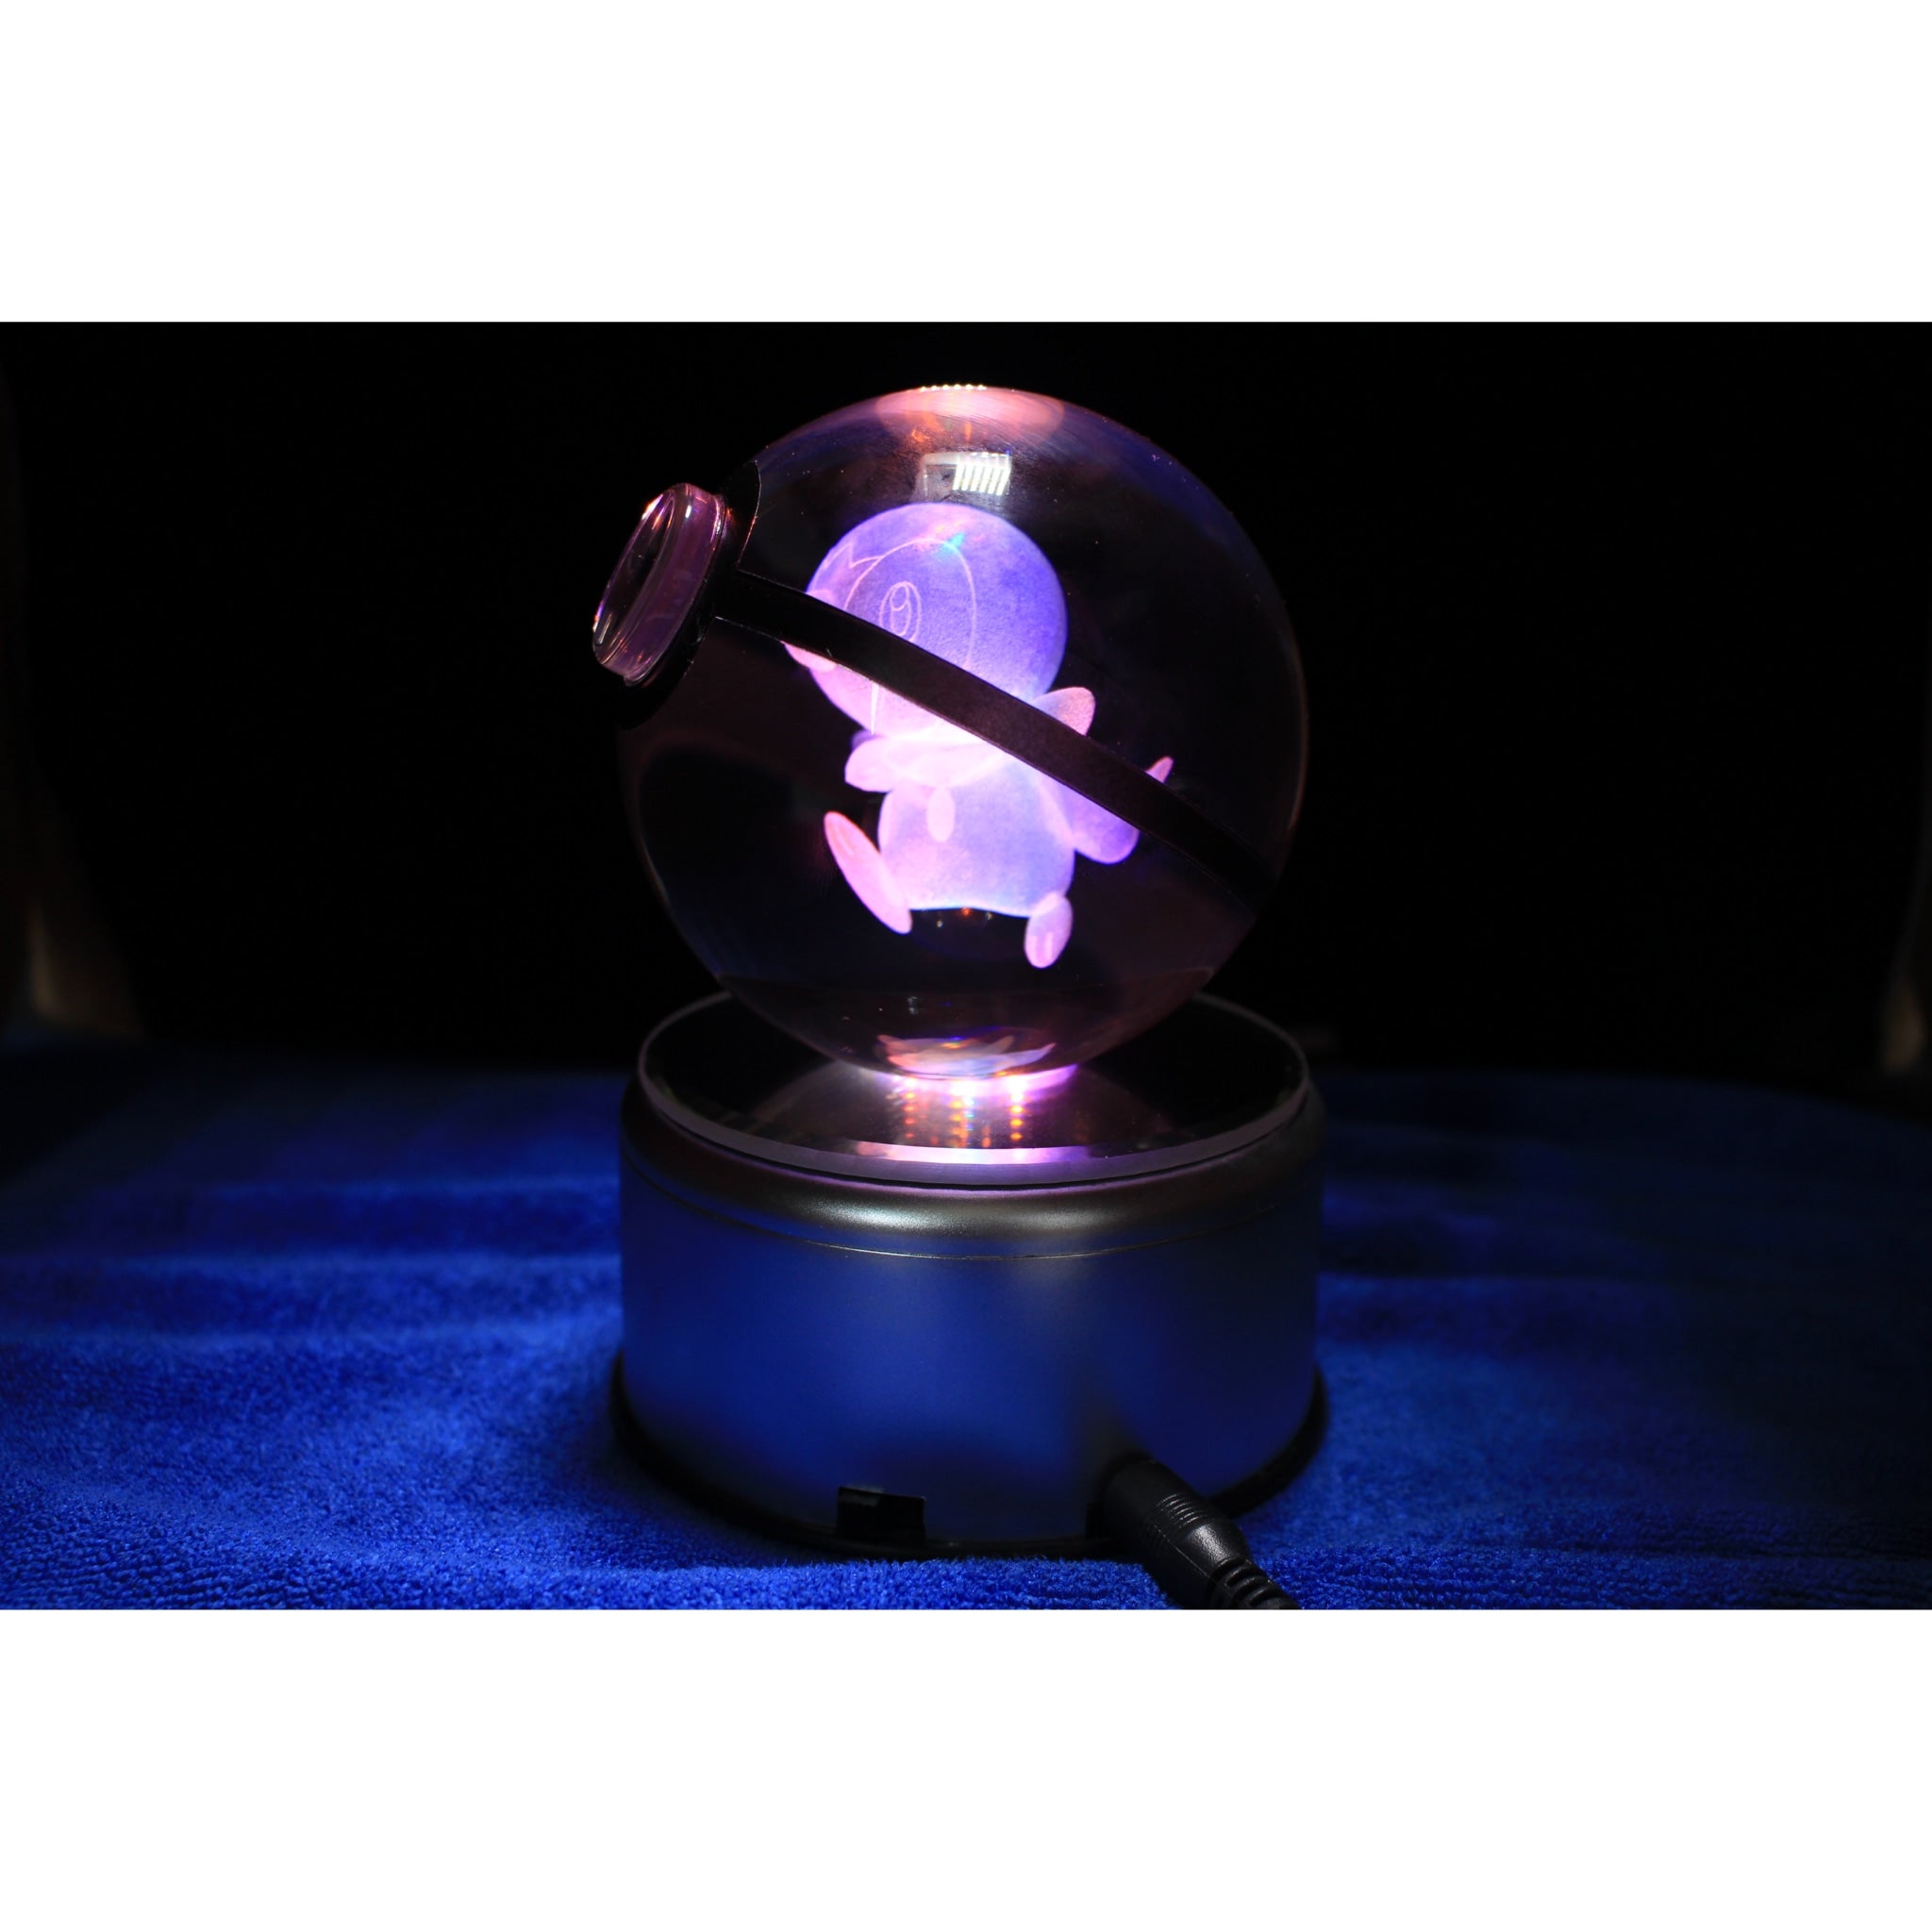 Piplup Pokemon Glass Crystal Pokeball 43 with Light-Up LED Base Ornament 80mm XL Size